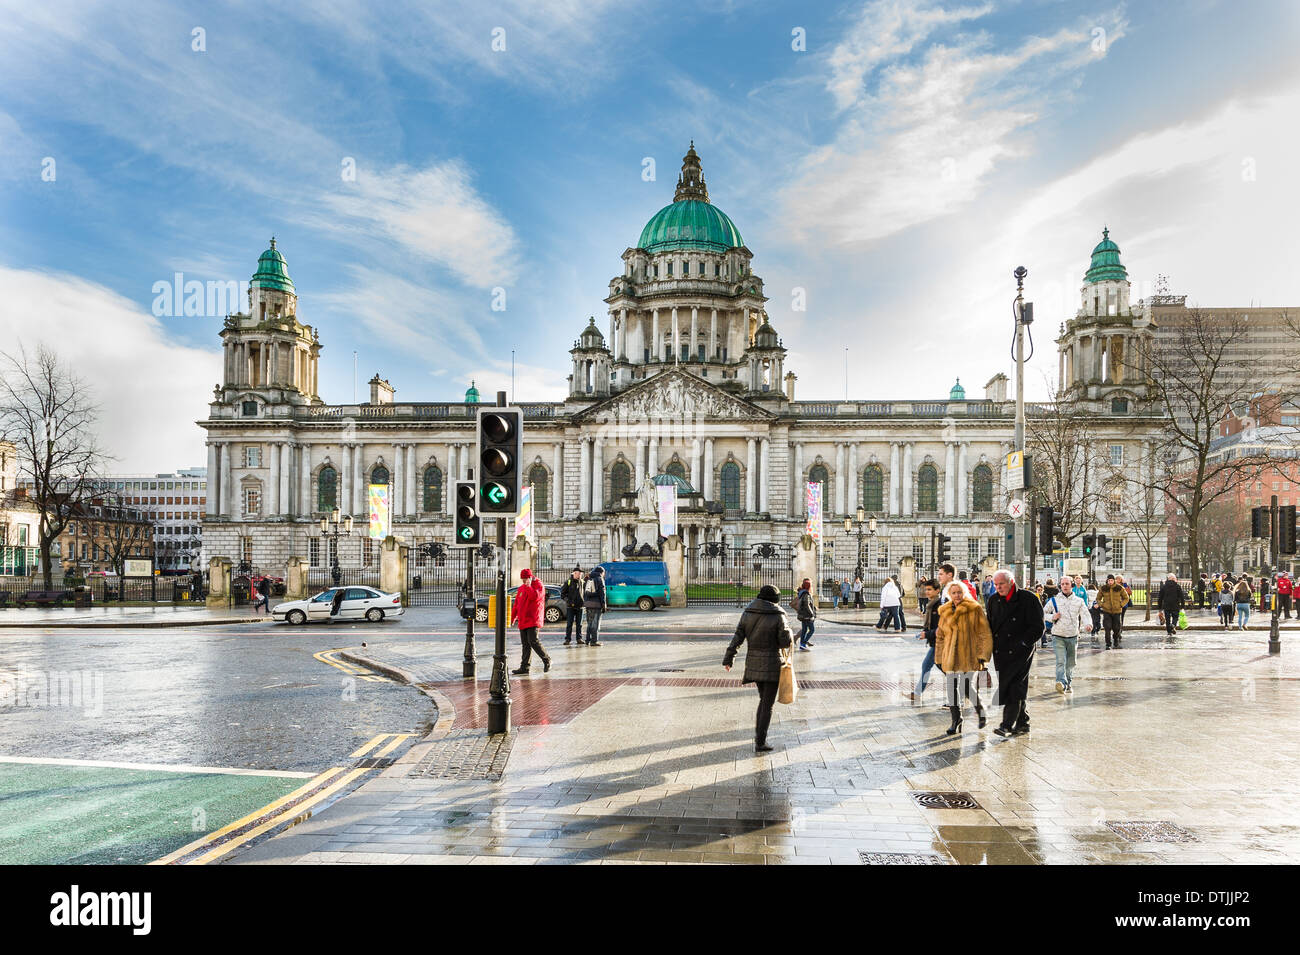 Belfast City Hall is Belfast City Council's civic building. It is located in Donegall Square, in the heart of Belfast city centr Stock Photo